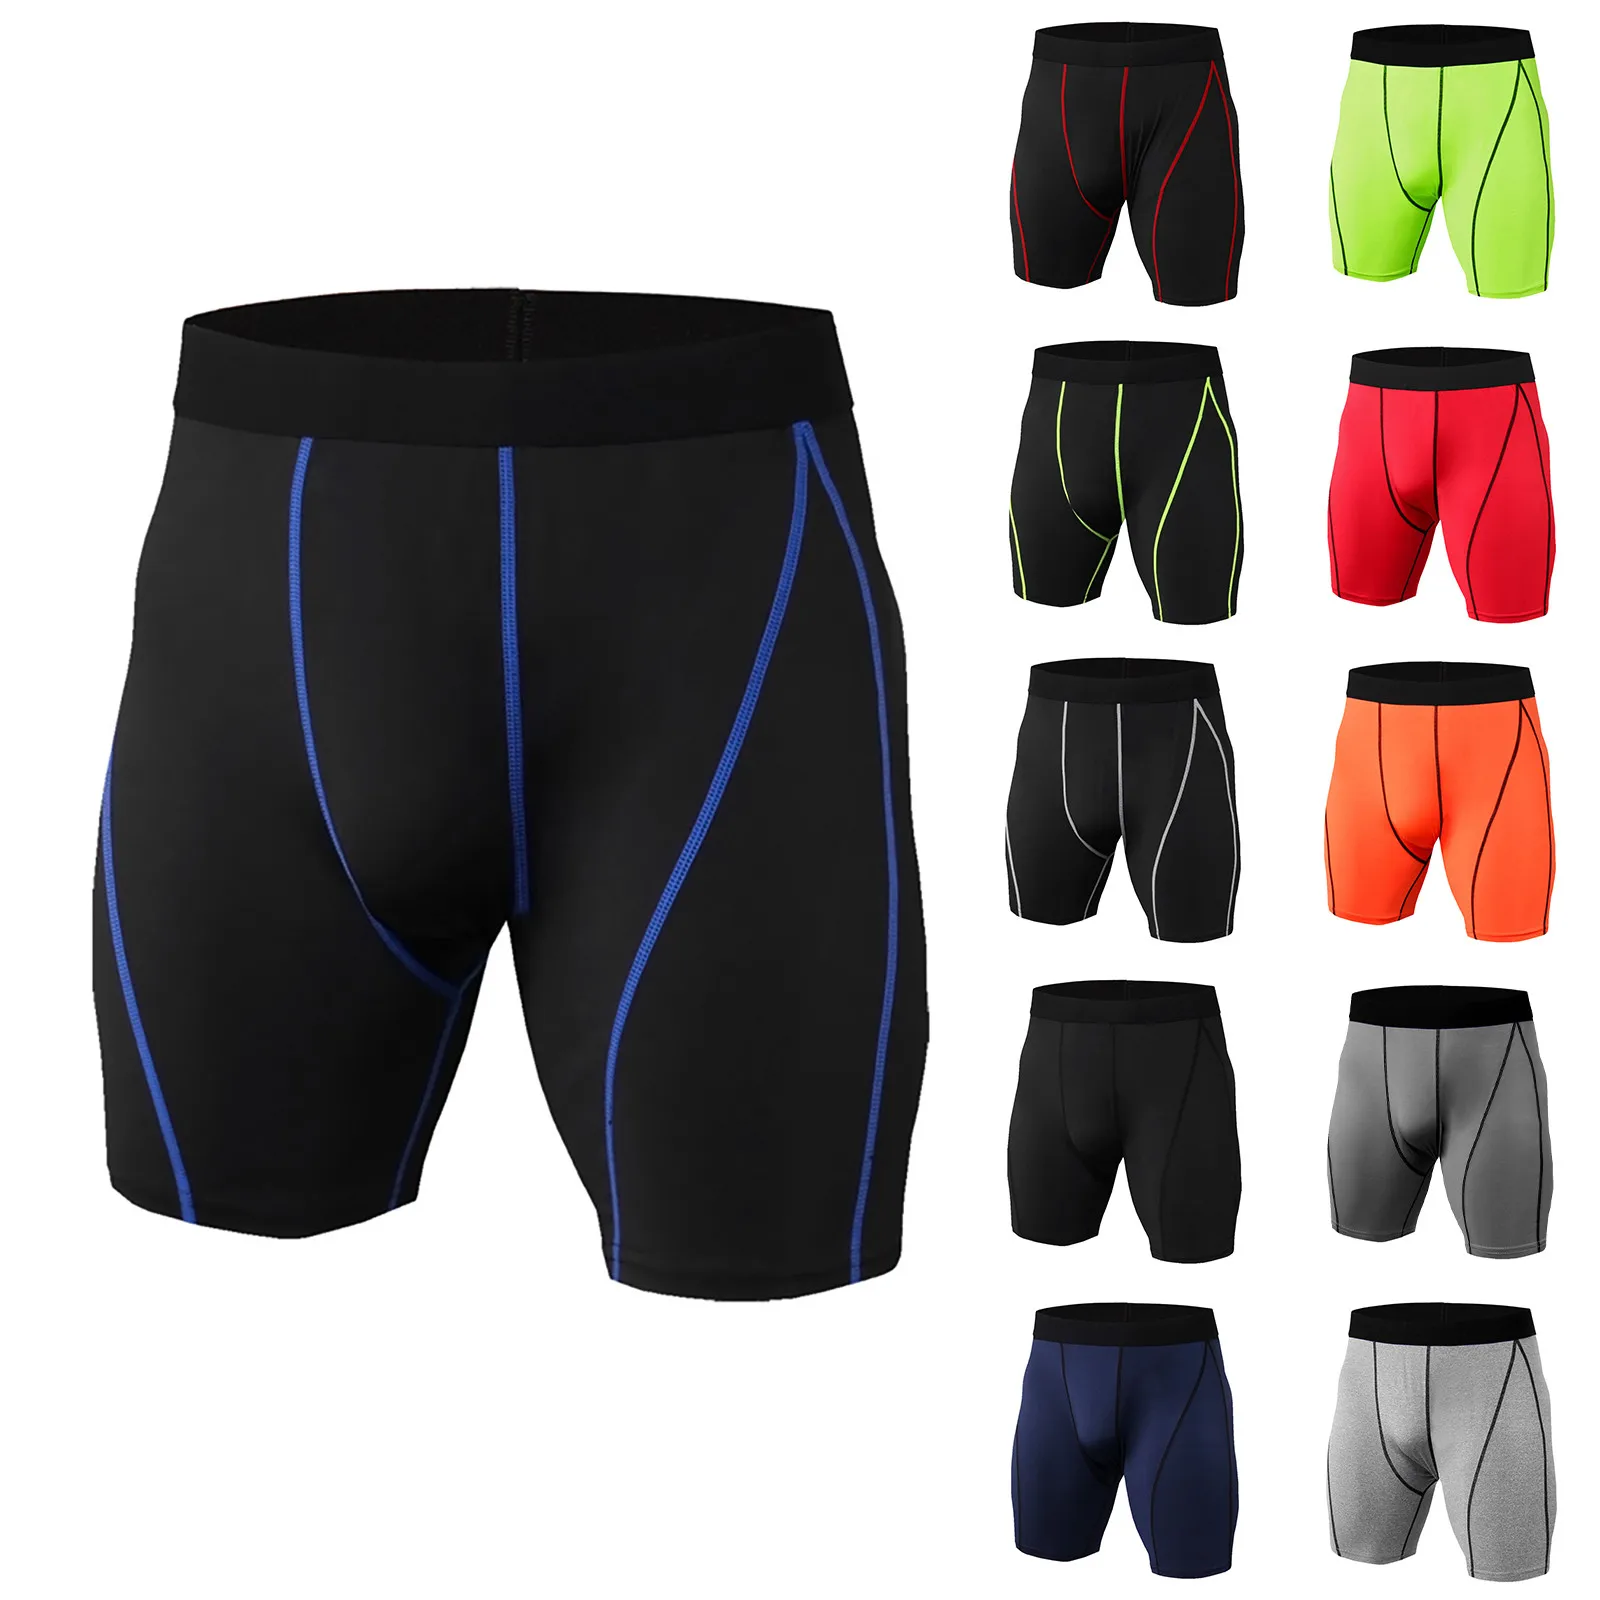 Fashion Men Compression Shorts Running Tights Quick Drying Gym Athletic  Fitness Sport Running Training Male Shorts Underwear#p3 - AliExpress